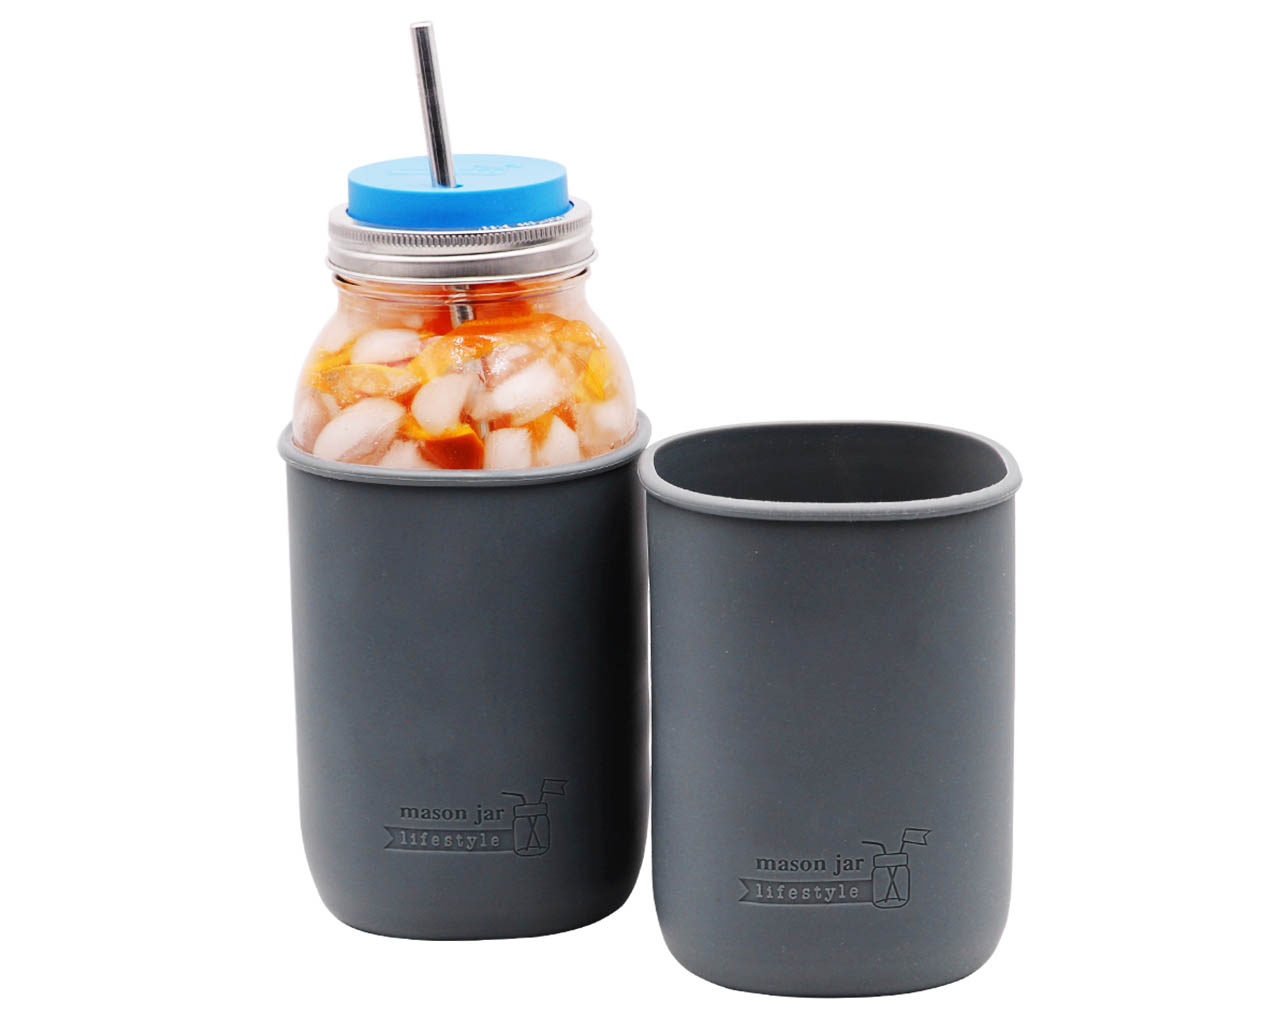 https://masonjarlifestyle.com/cdn/shop/files/mason-jar-lifestyle-charcoal-gray-silicone-sleeve-half-gallon-64oz-wide-mouth-bright-blue-straw-hole-tumbler-lid-extra-long-safer-stainless-steel-straw-iced-tea.jpg?v=1700382030&width=1280